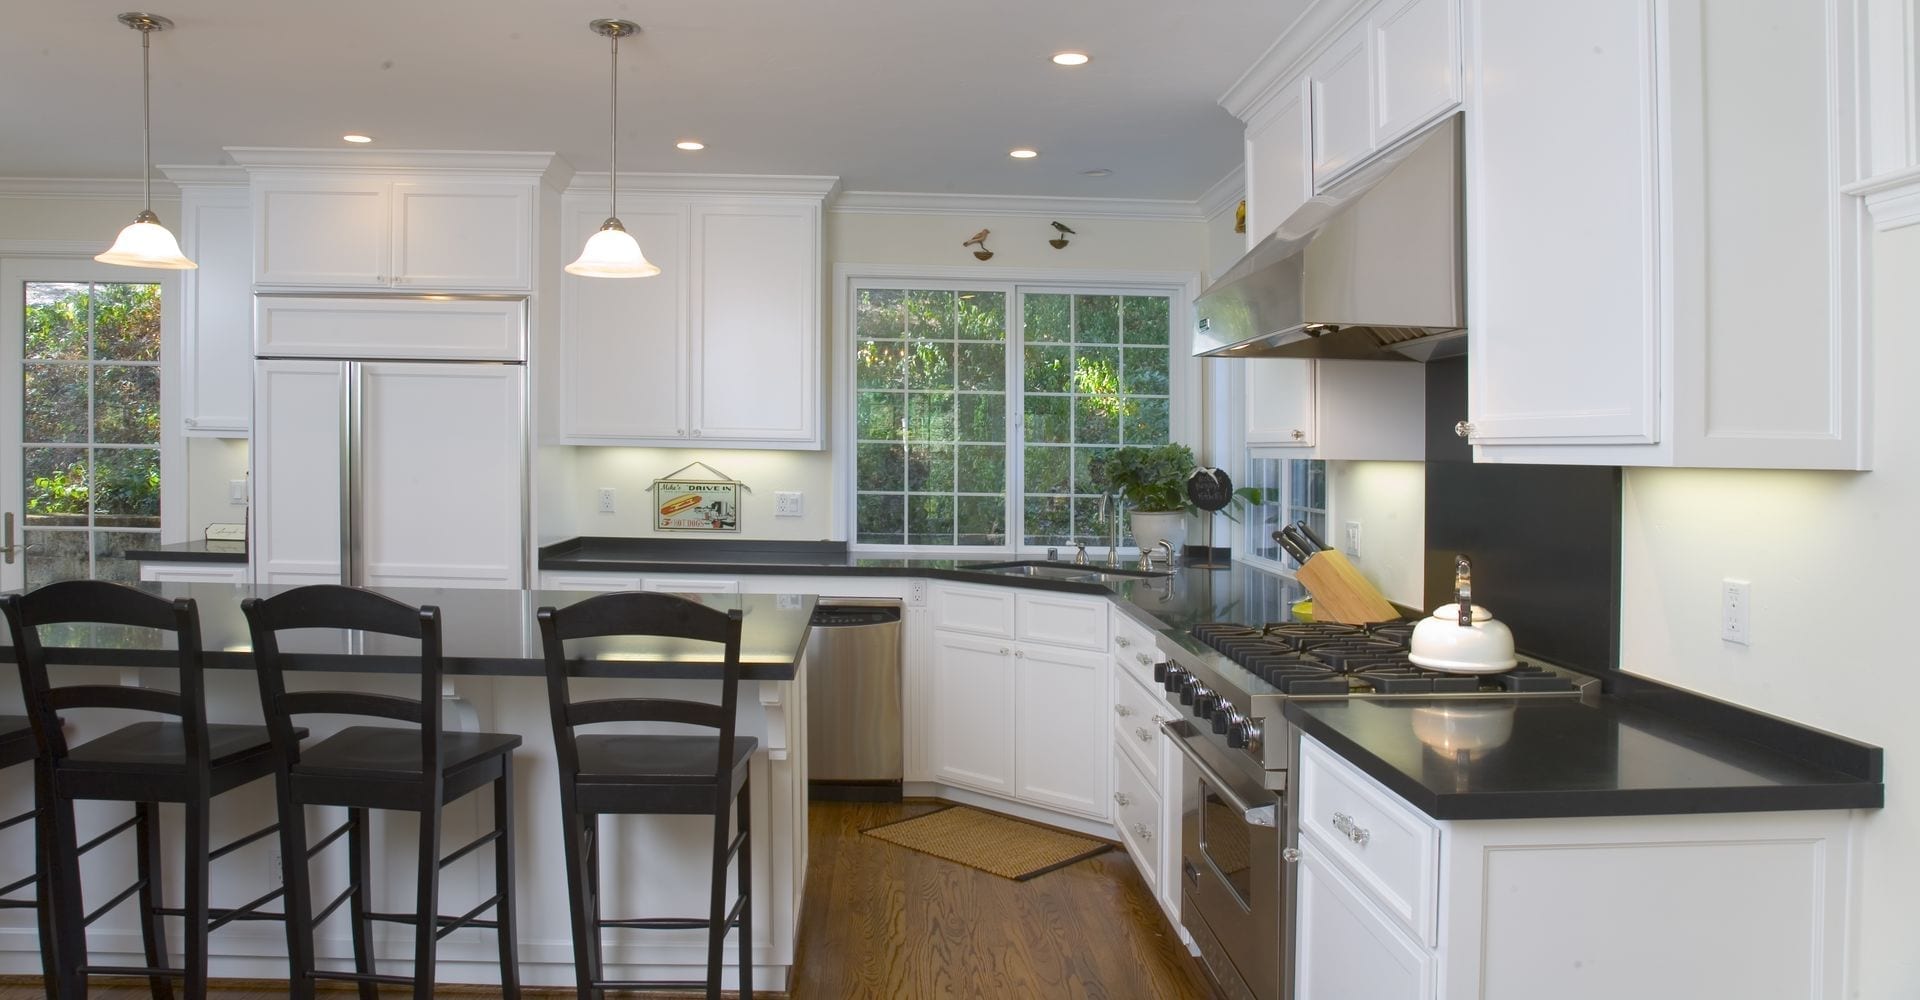 How Much Does an Average Kitchen Remodel Cost?